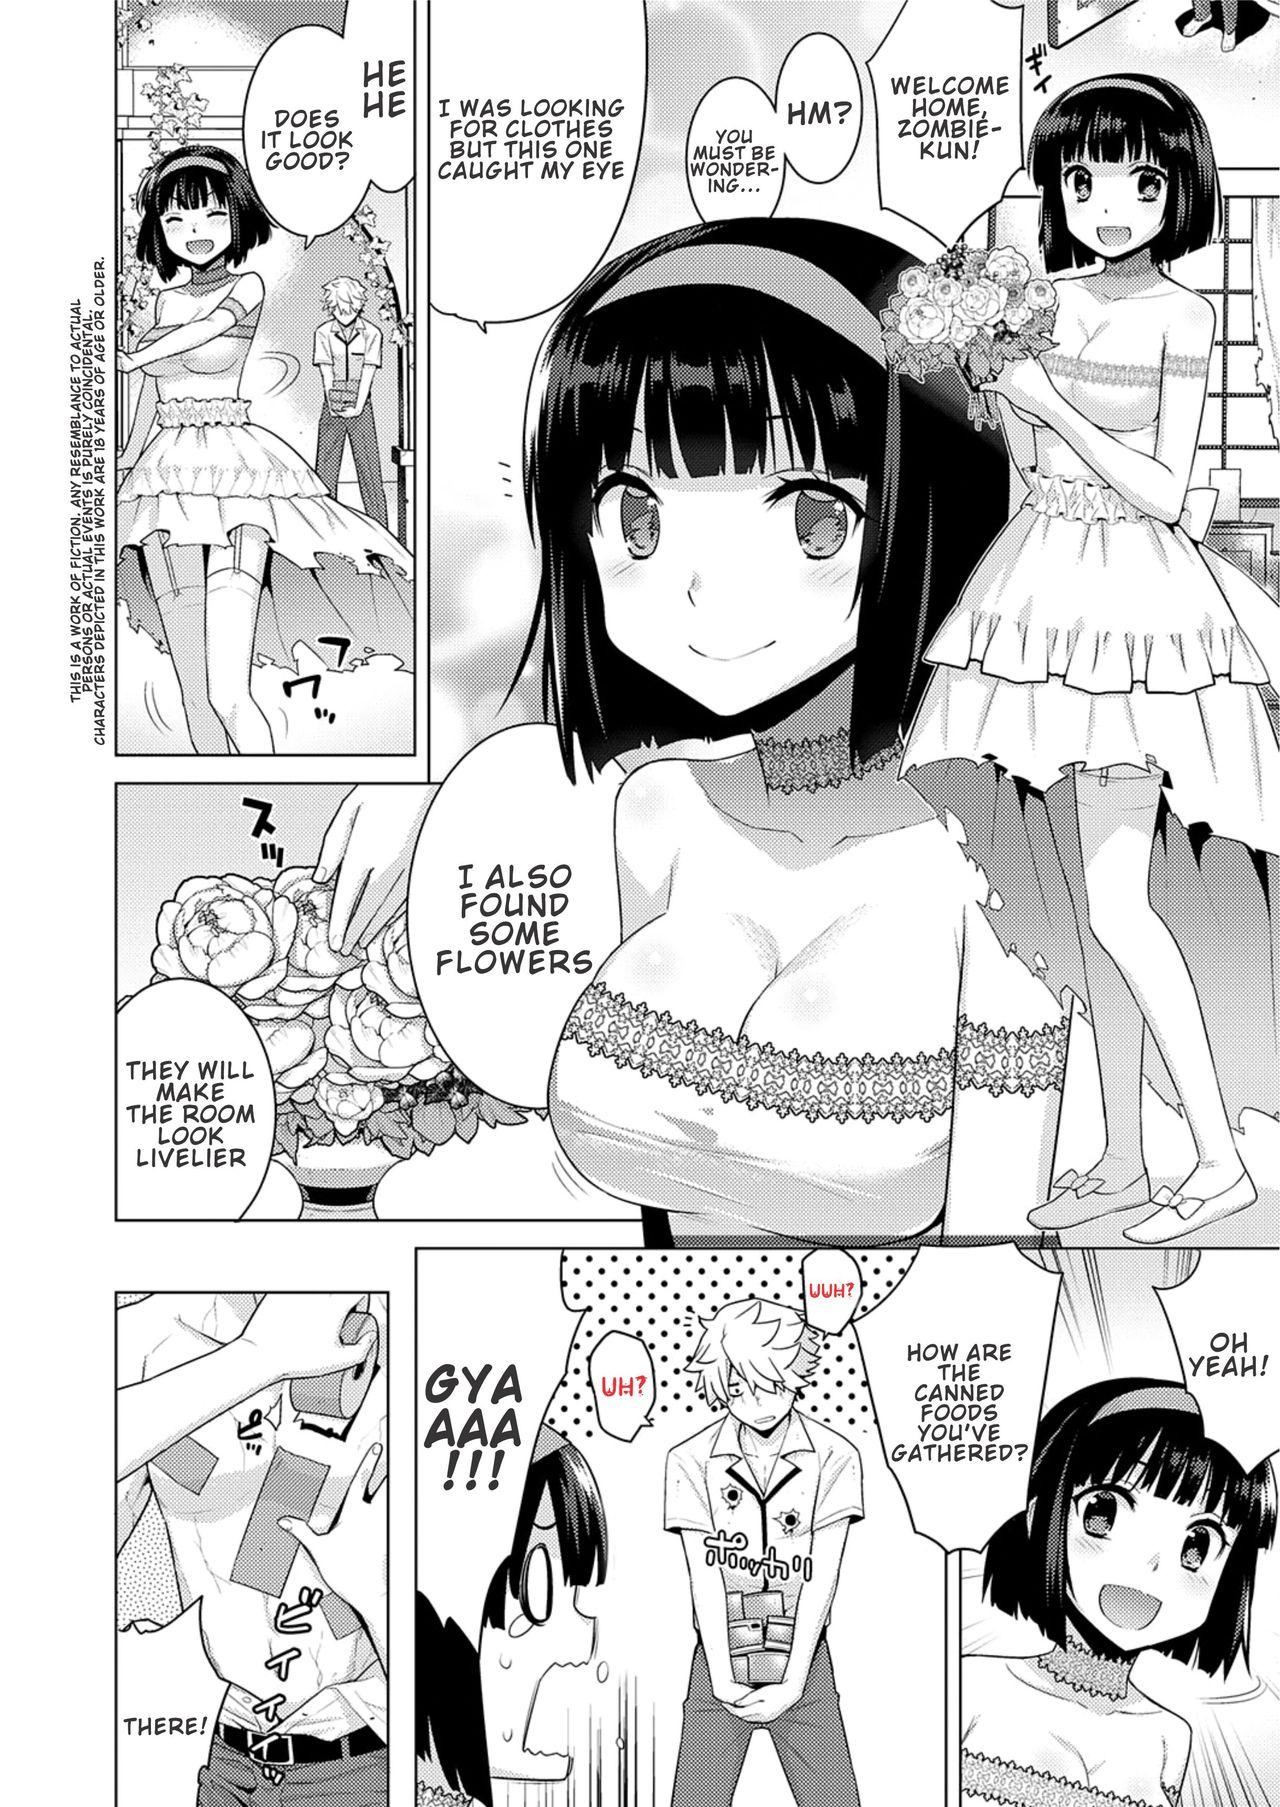 Titten Zombie no Hanayome | The Bride of Zombie Gay Cut - Page 2